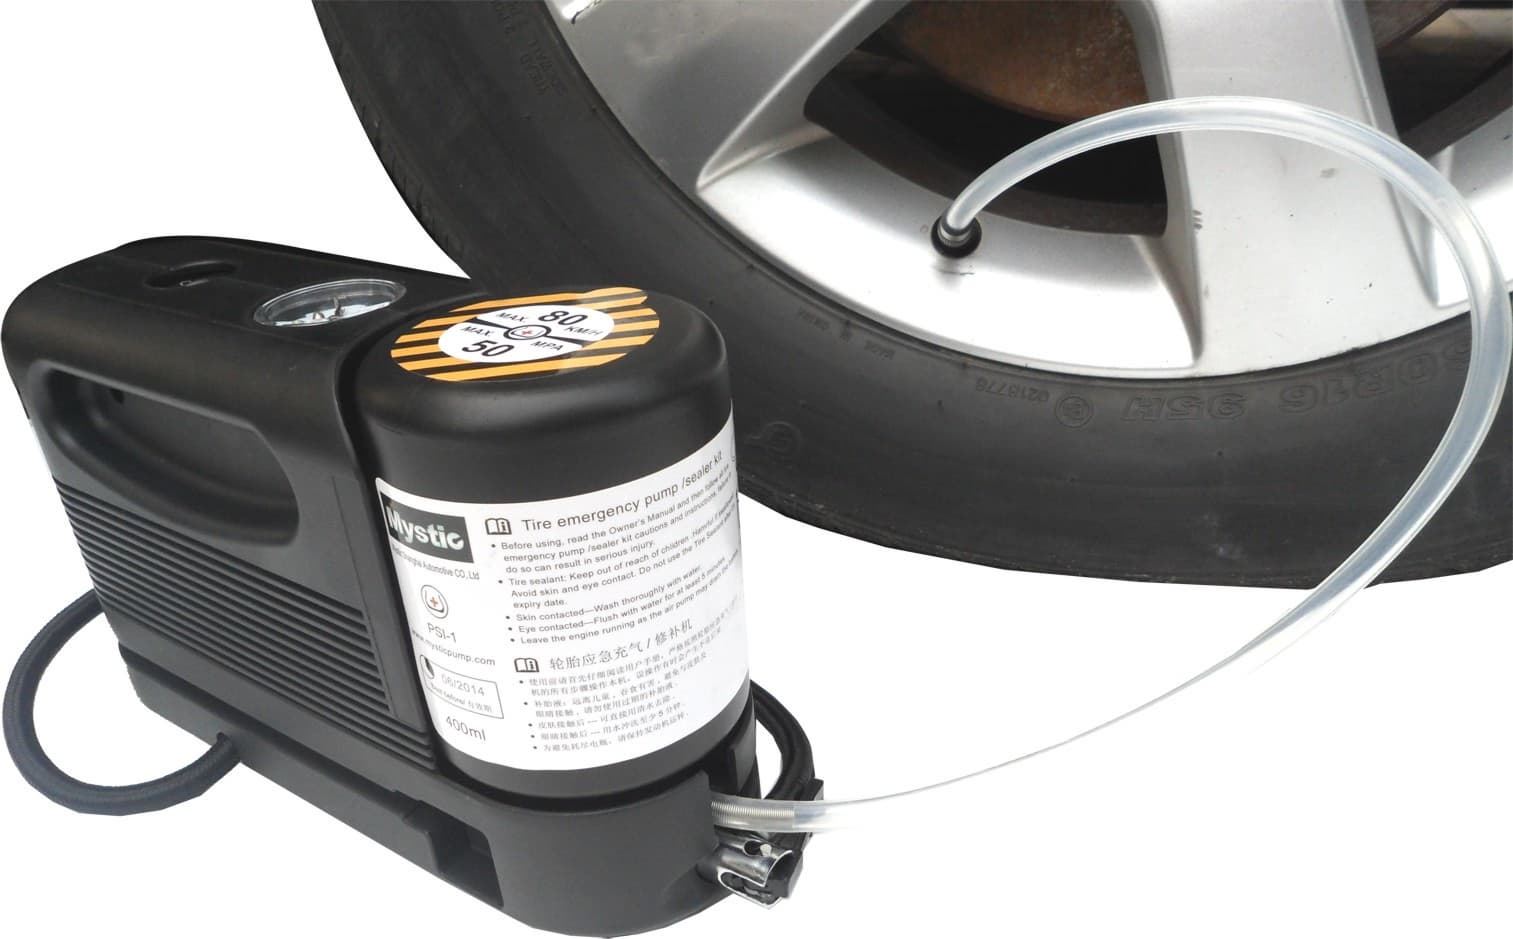 Tire Mobility Kit for Ford Vehicles Convenient Solutions for On-the-Road Emergencies